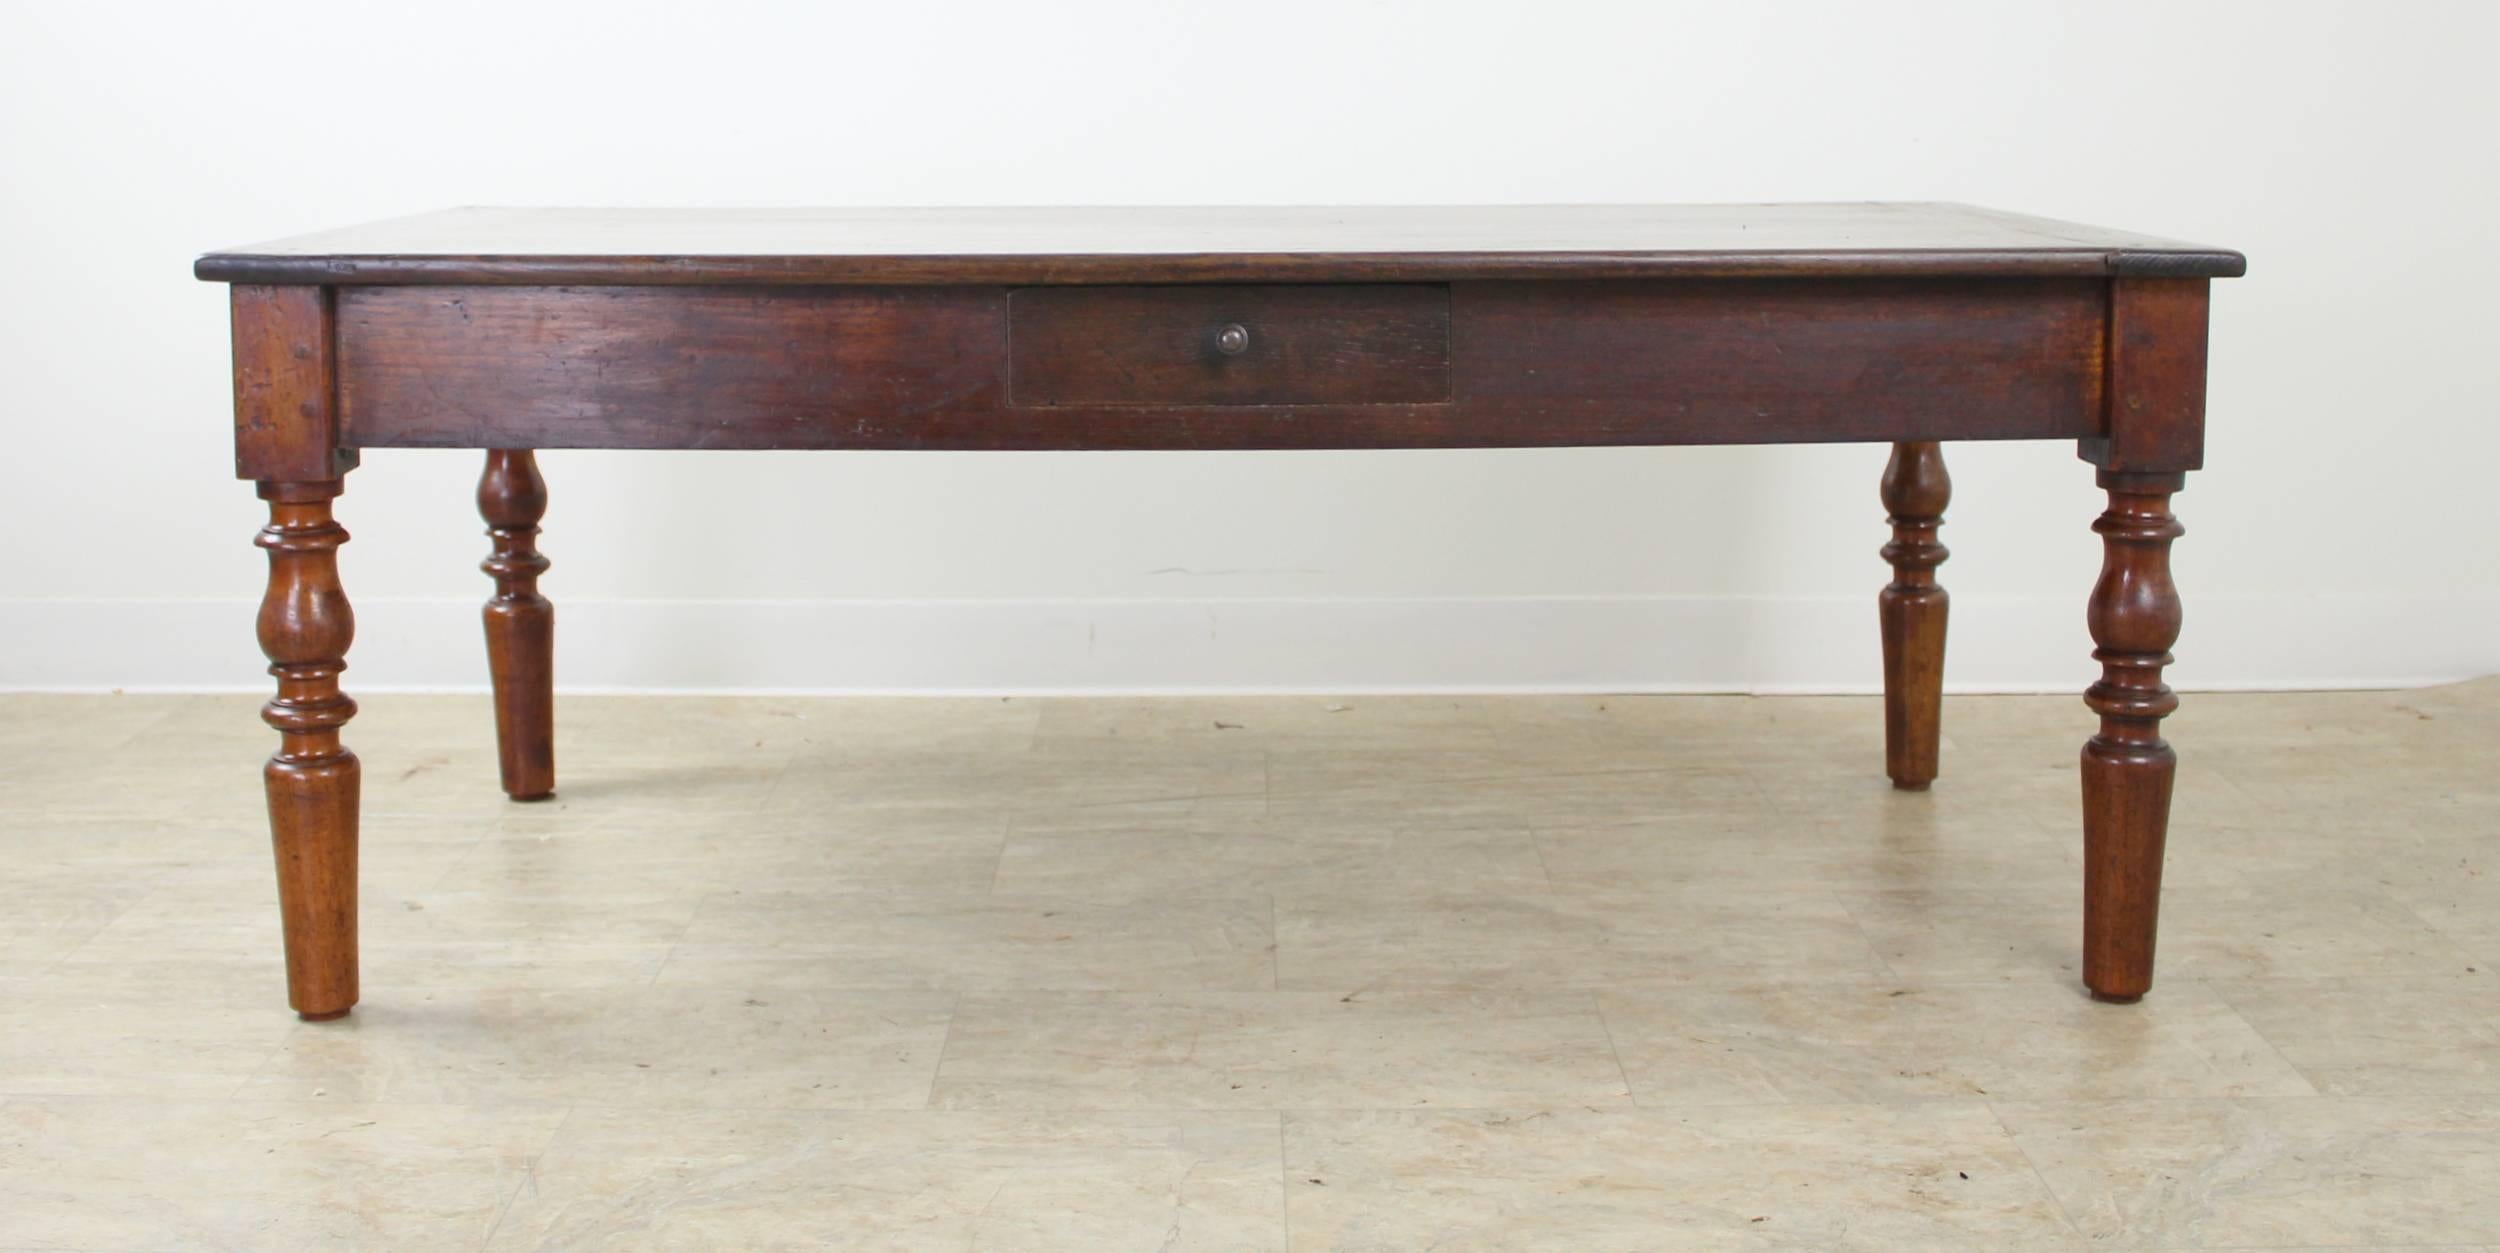 French Antique Chestnut and Fruitwood Coffee Table with Three Drawers and Serving Shelf